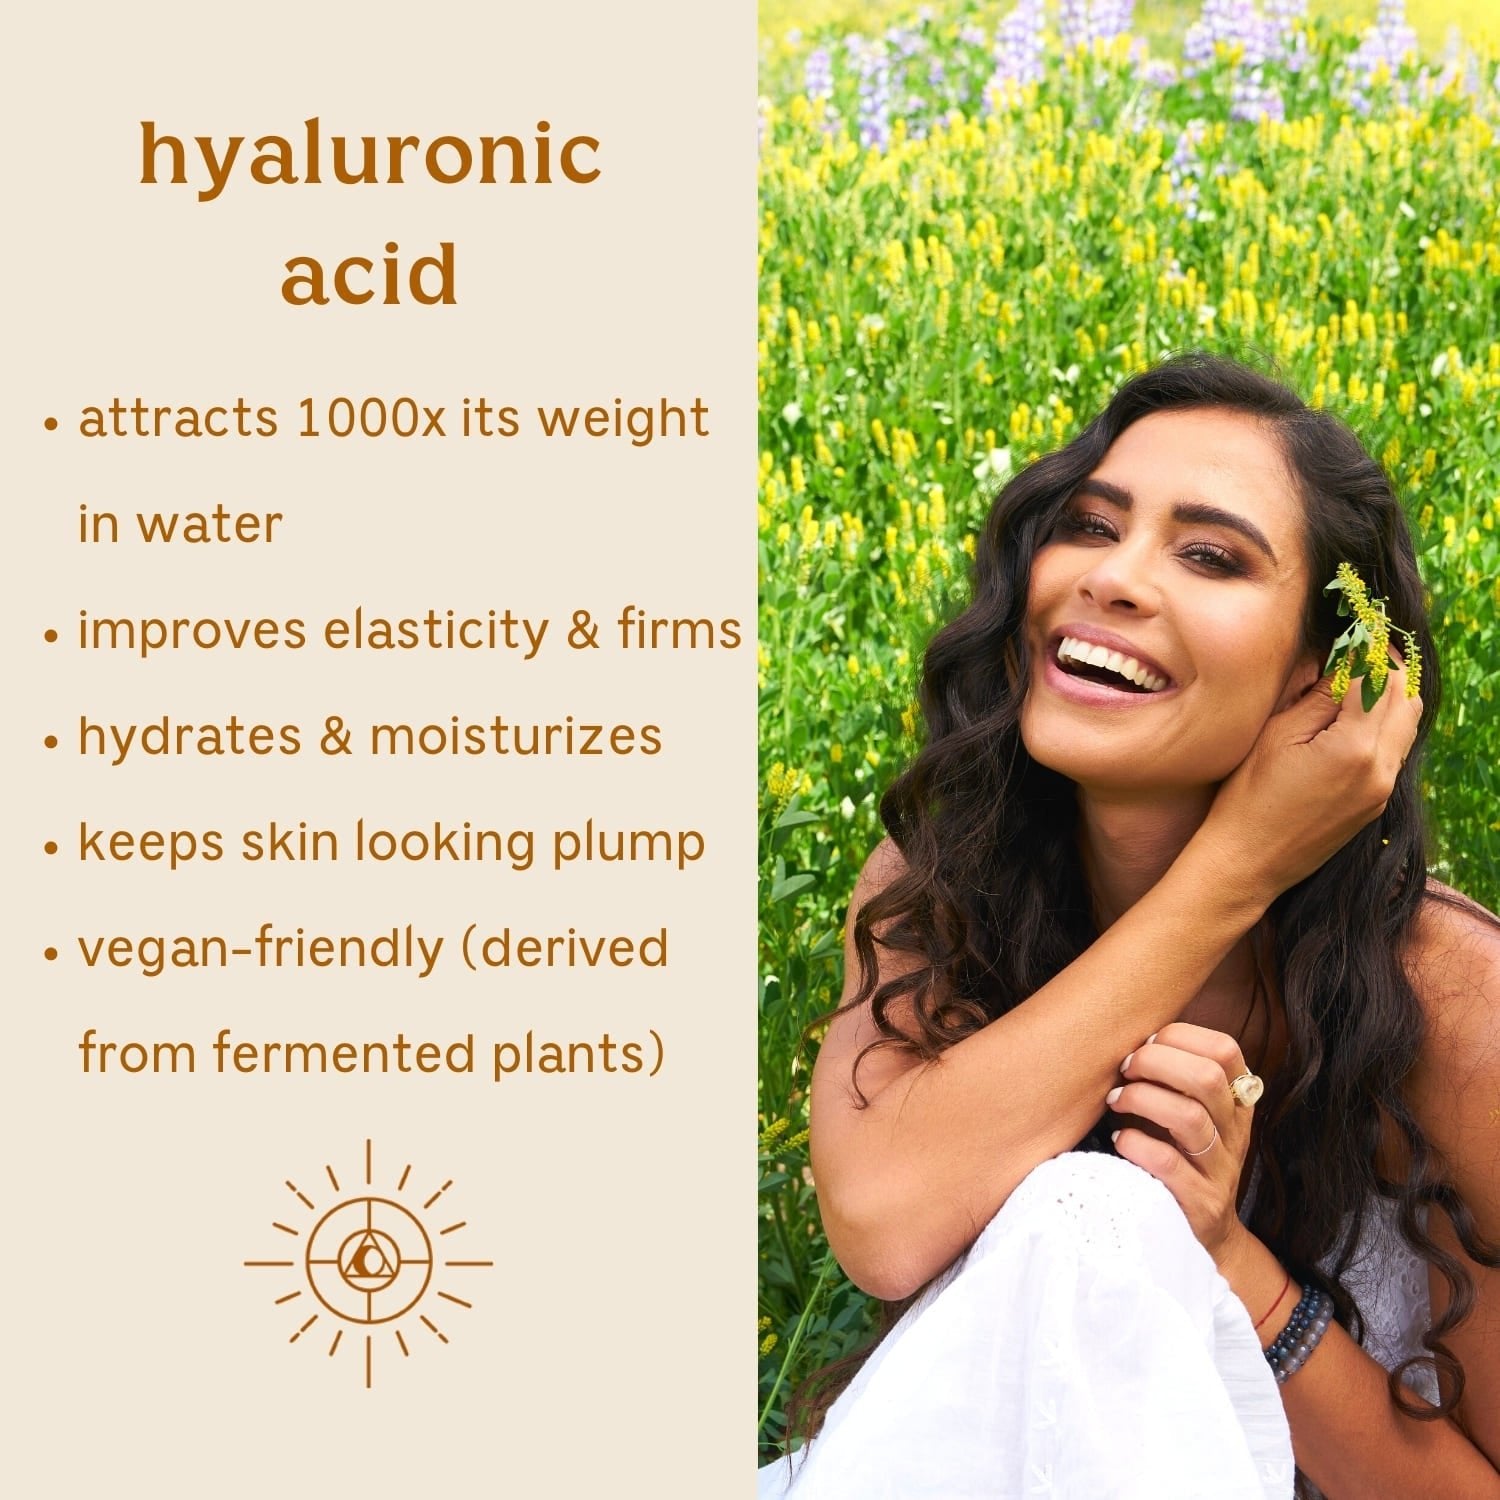 Solluna's Feel Good Eye Cream key ingredient benefit description. Hyaluronic Acid: Attracts 1000x its weight in water, Improves elasticity & firms, Hydrates & moisturizes, Keeps skin looking plump, Vegan-friendly (derived from fermented plants)